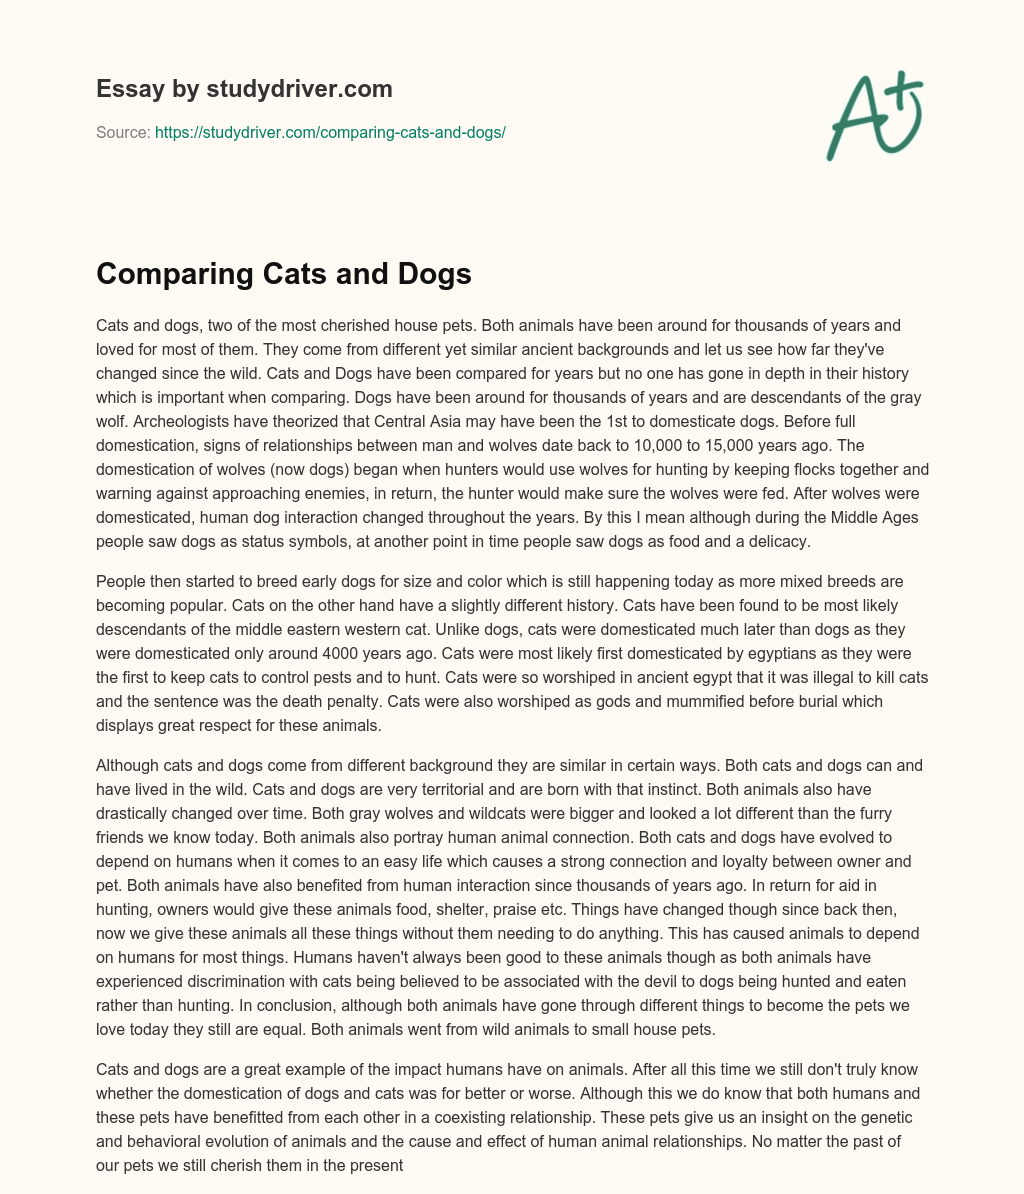 Comparing Cats and Dogs essay